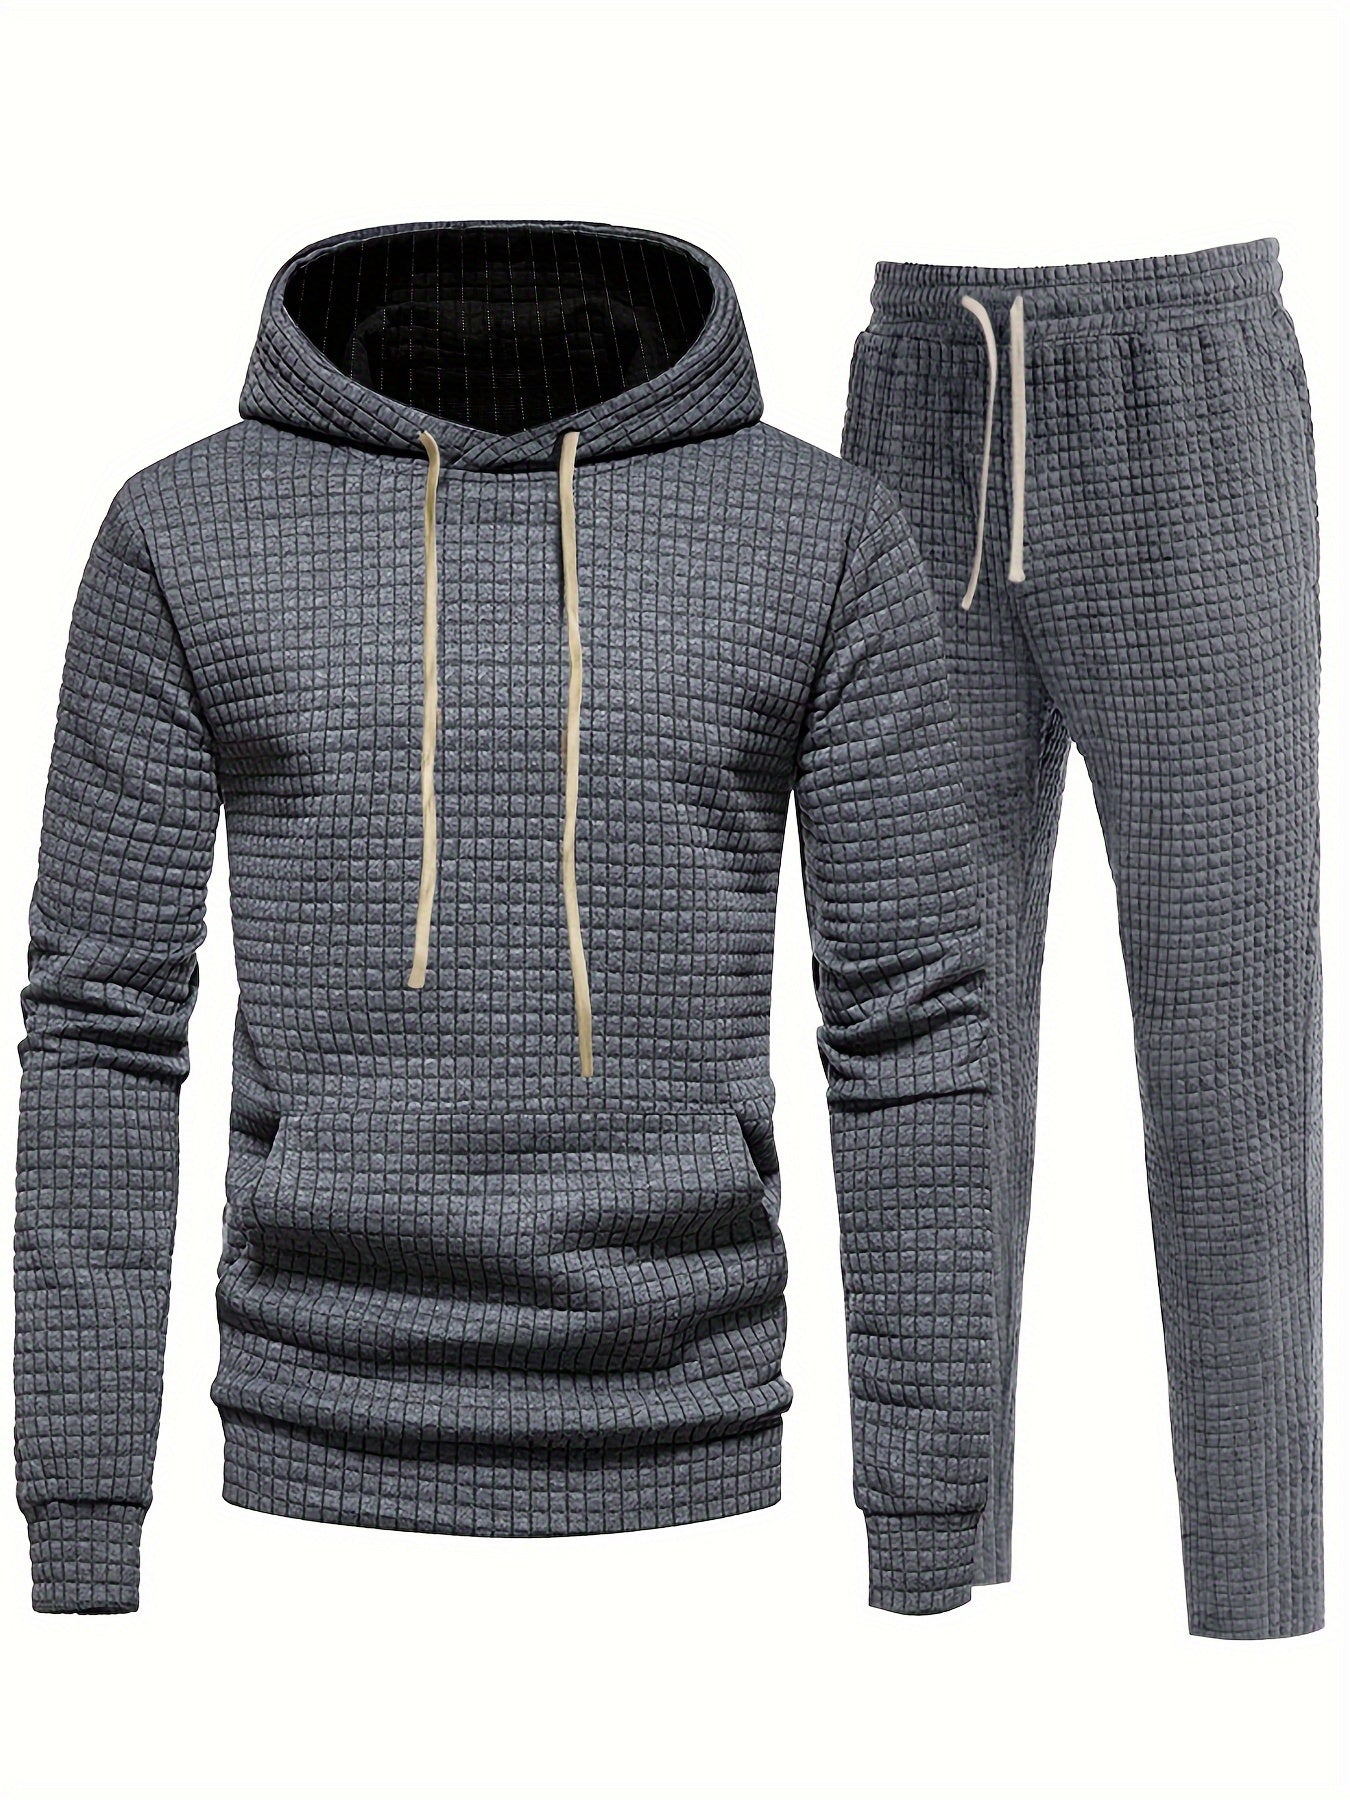 Men's Casual Suit Autumn And Winter Outdoor Sports Fitness Hooded Sweater Fashion Trendy Brand Waffle Jogging Training Two-piece Set